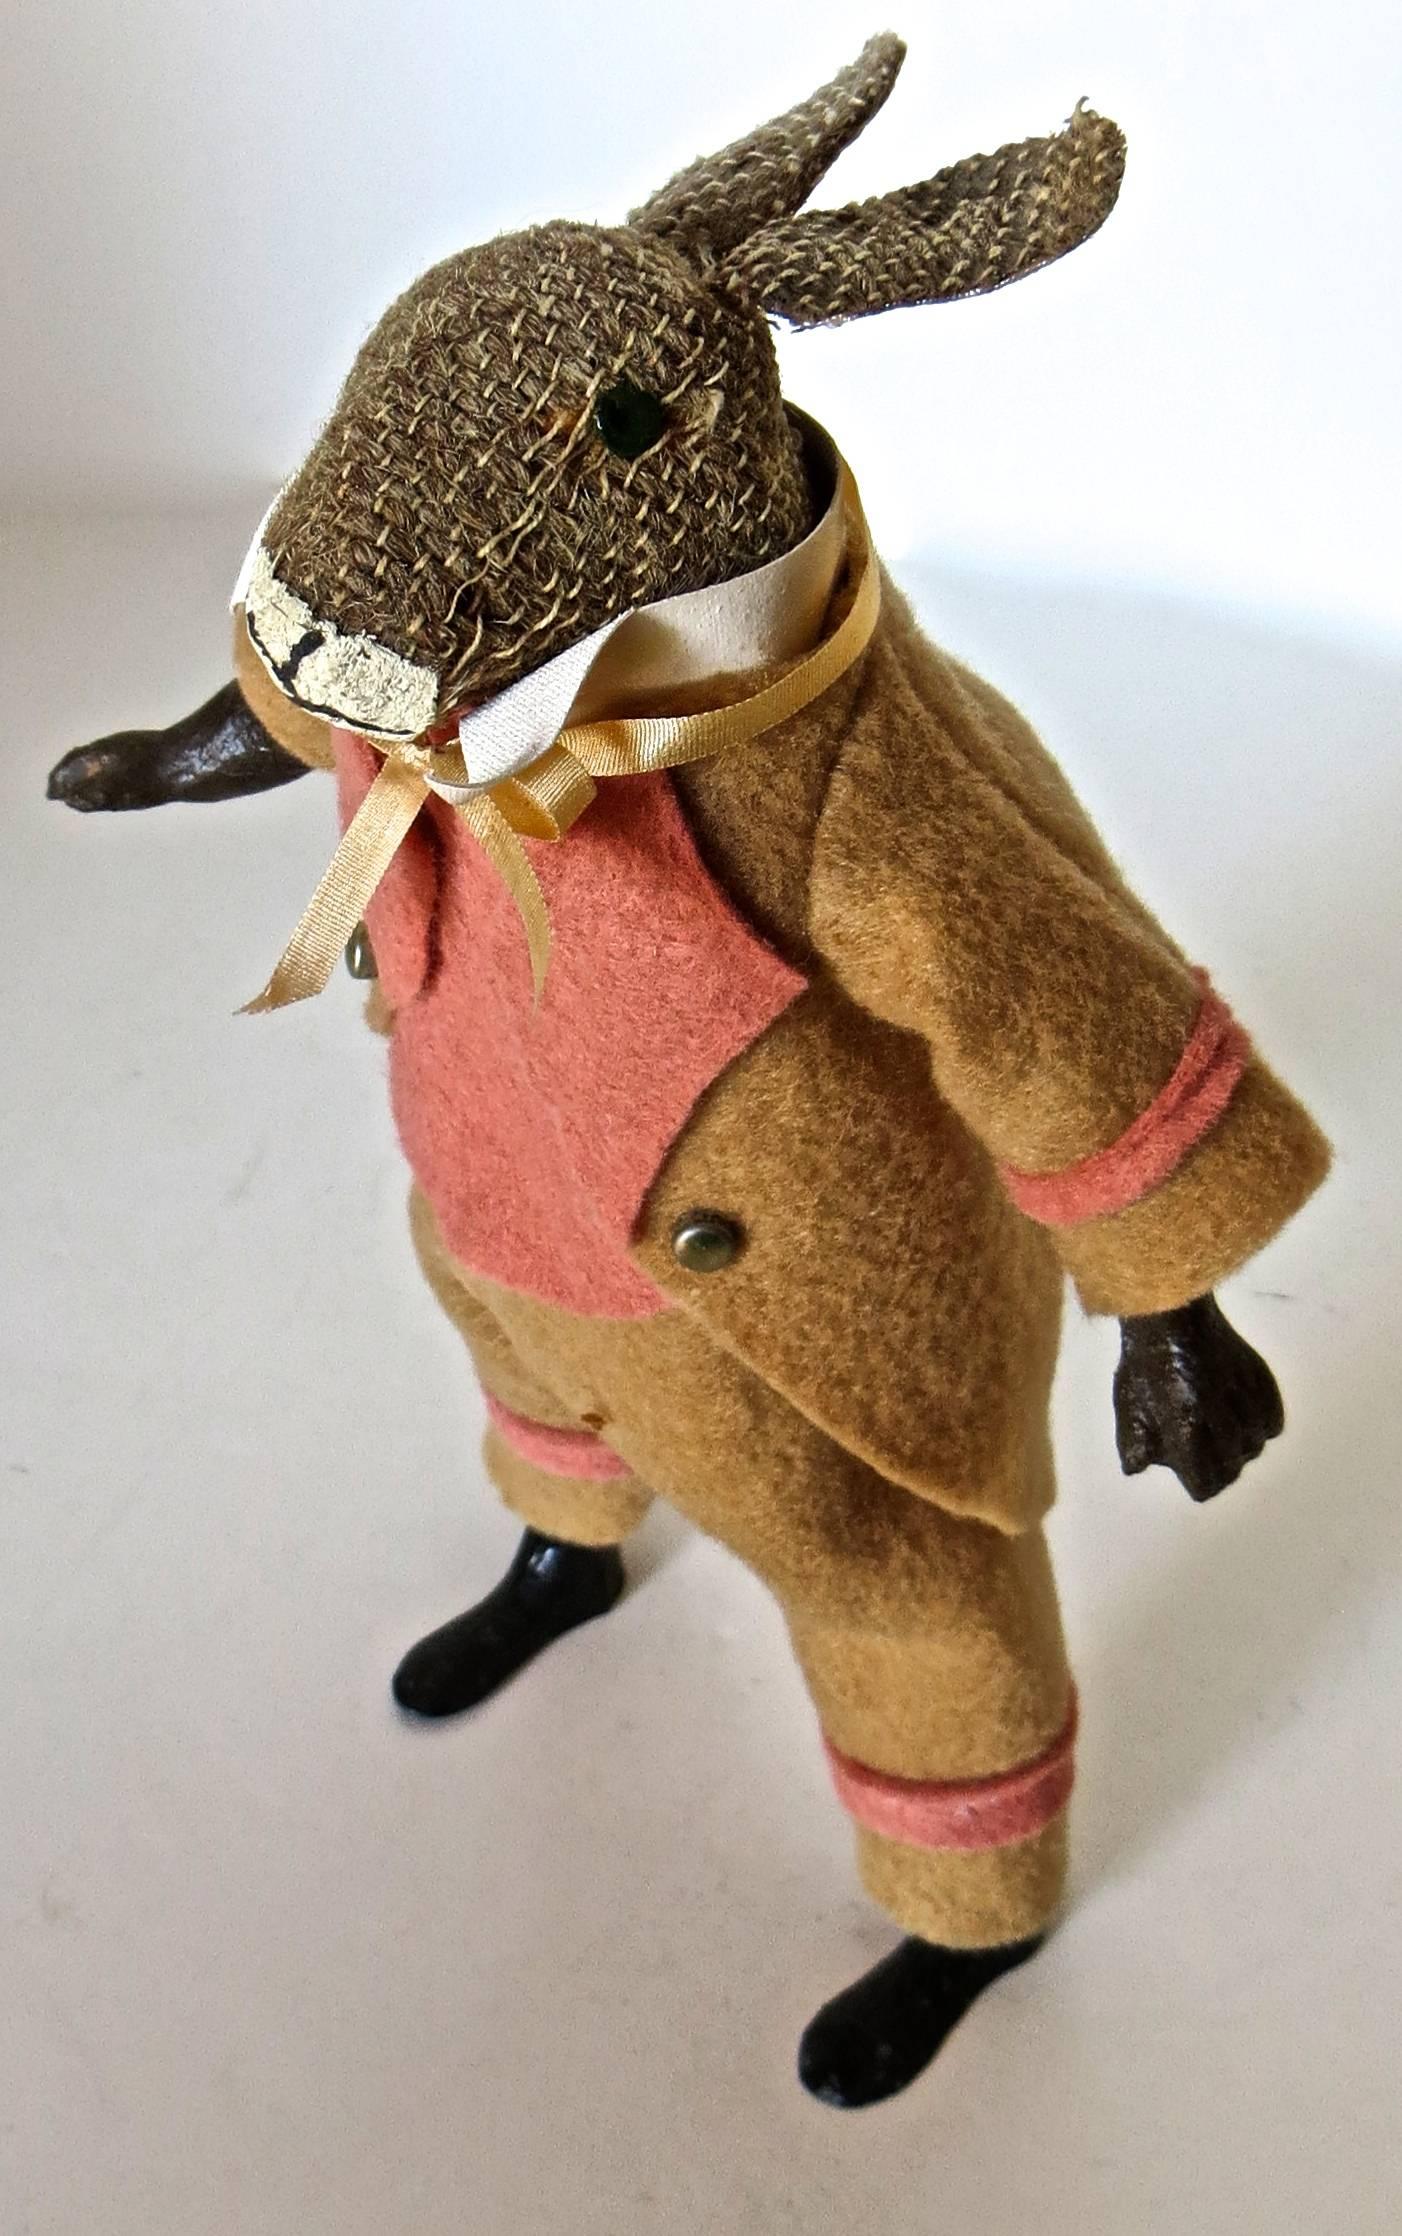 This rare walking rabbit clockwork toy was manufactured in circa 1890 and is probably of French manufacture, due to the lead feet, which was typical of French toy makers in that period.

It operates by winding up the attached clockwork key mounted